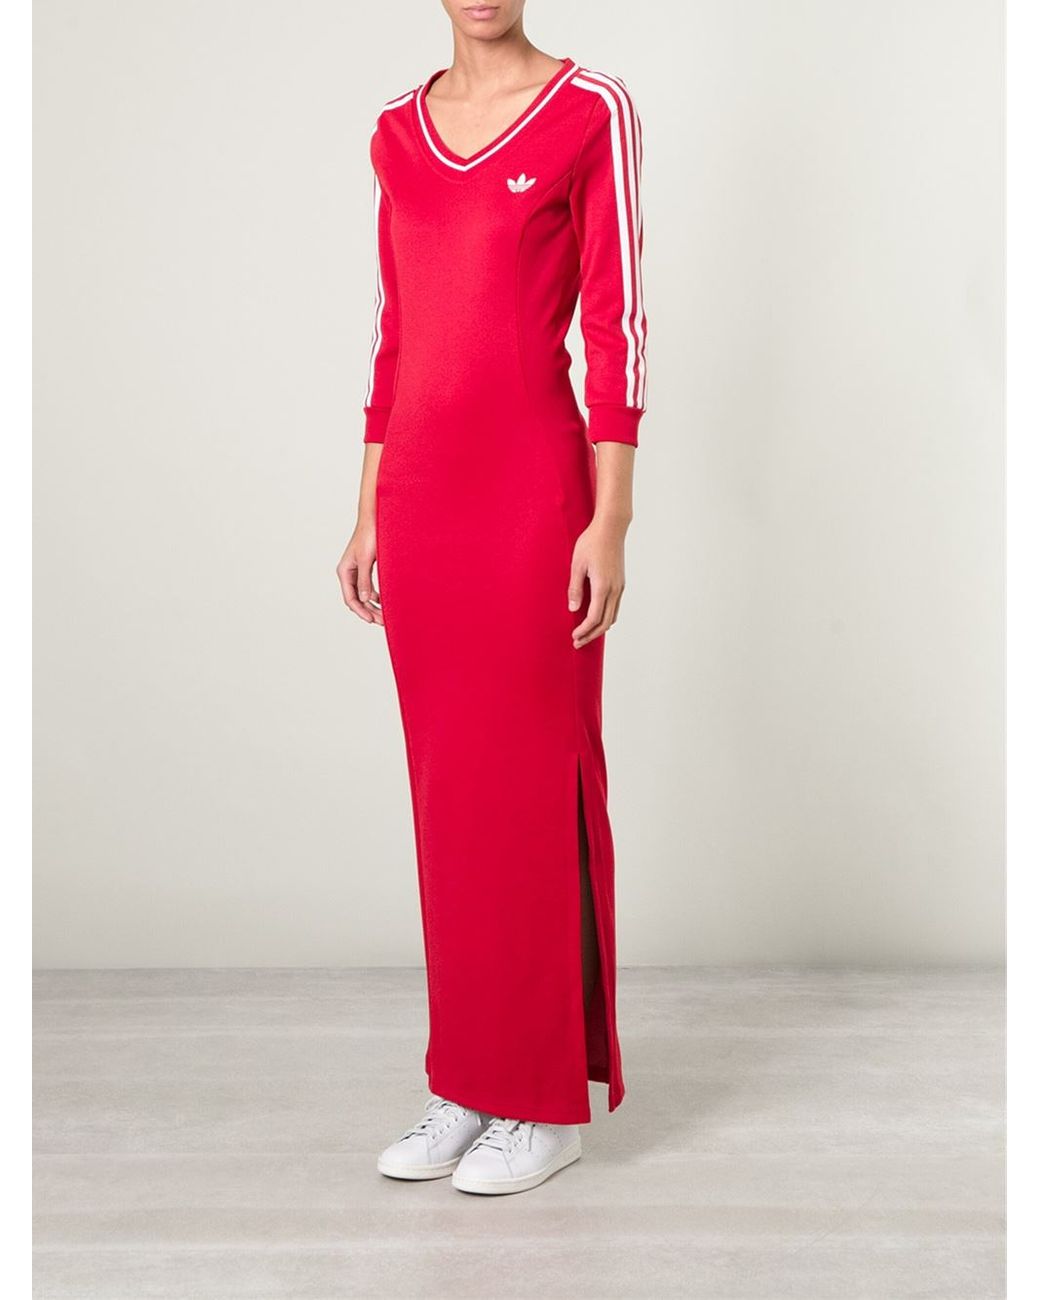 adidas Long Line Jersey Dress in Red | Lyst UK